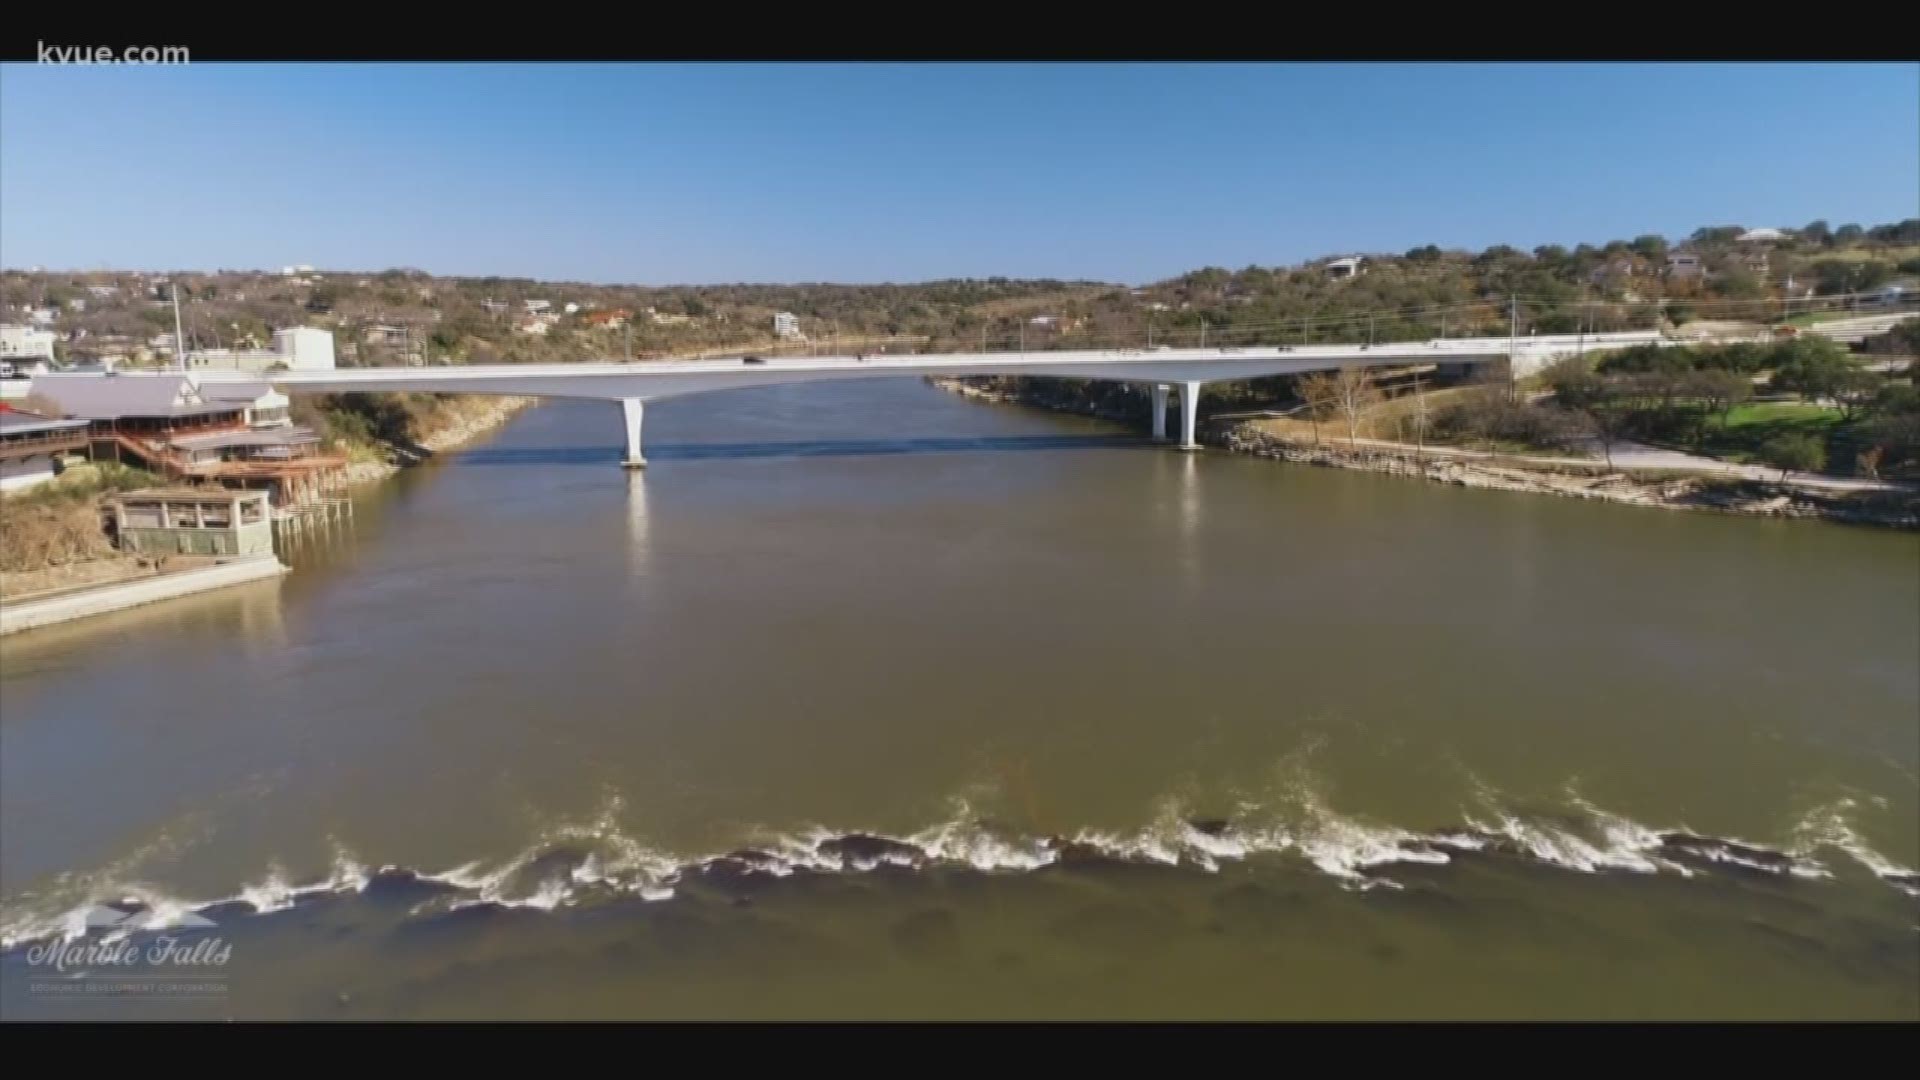 If you've never seen the historic falls at Lake Marble Falls, now's your chance!